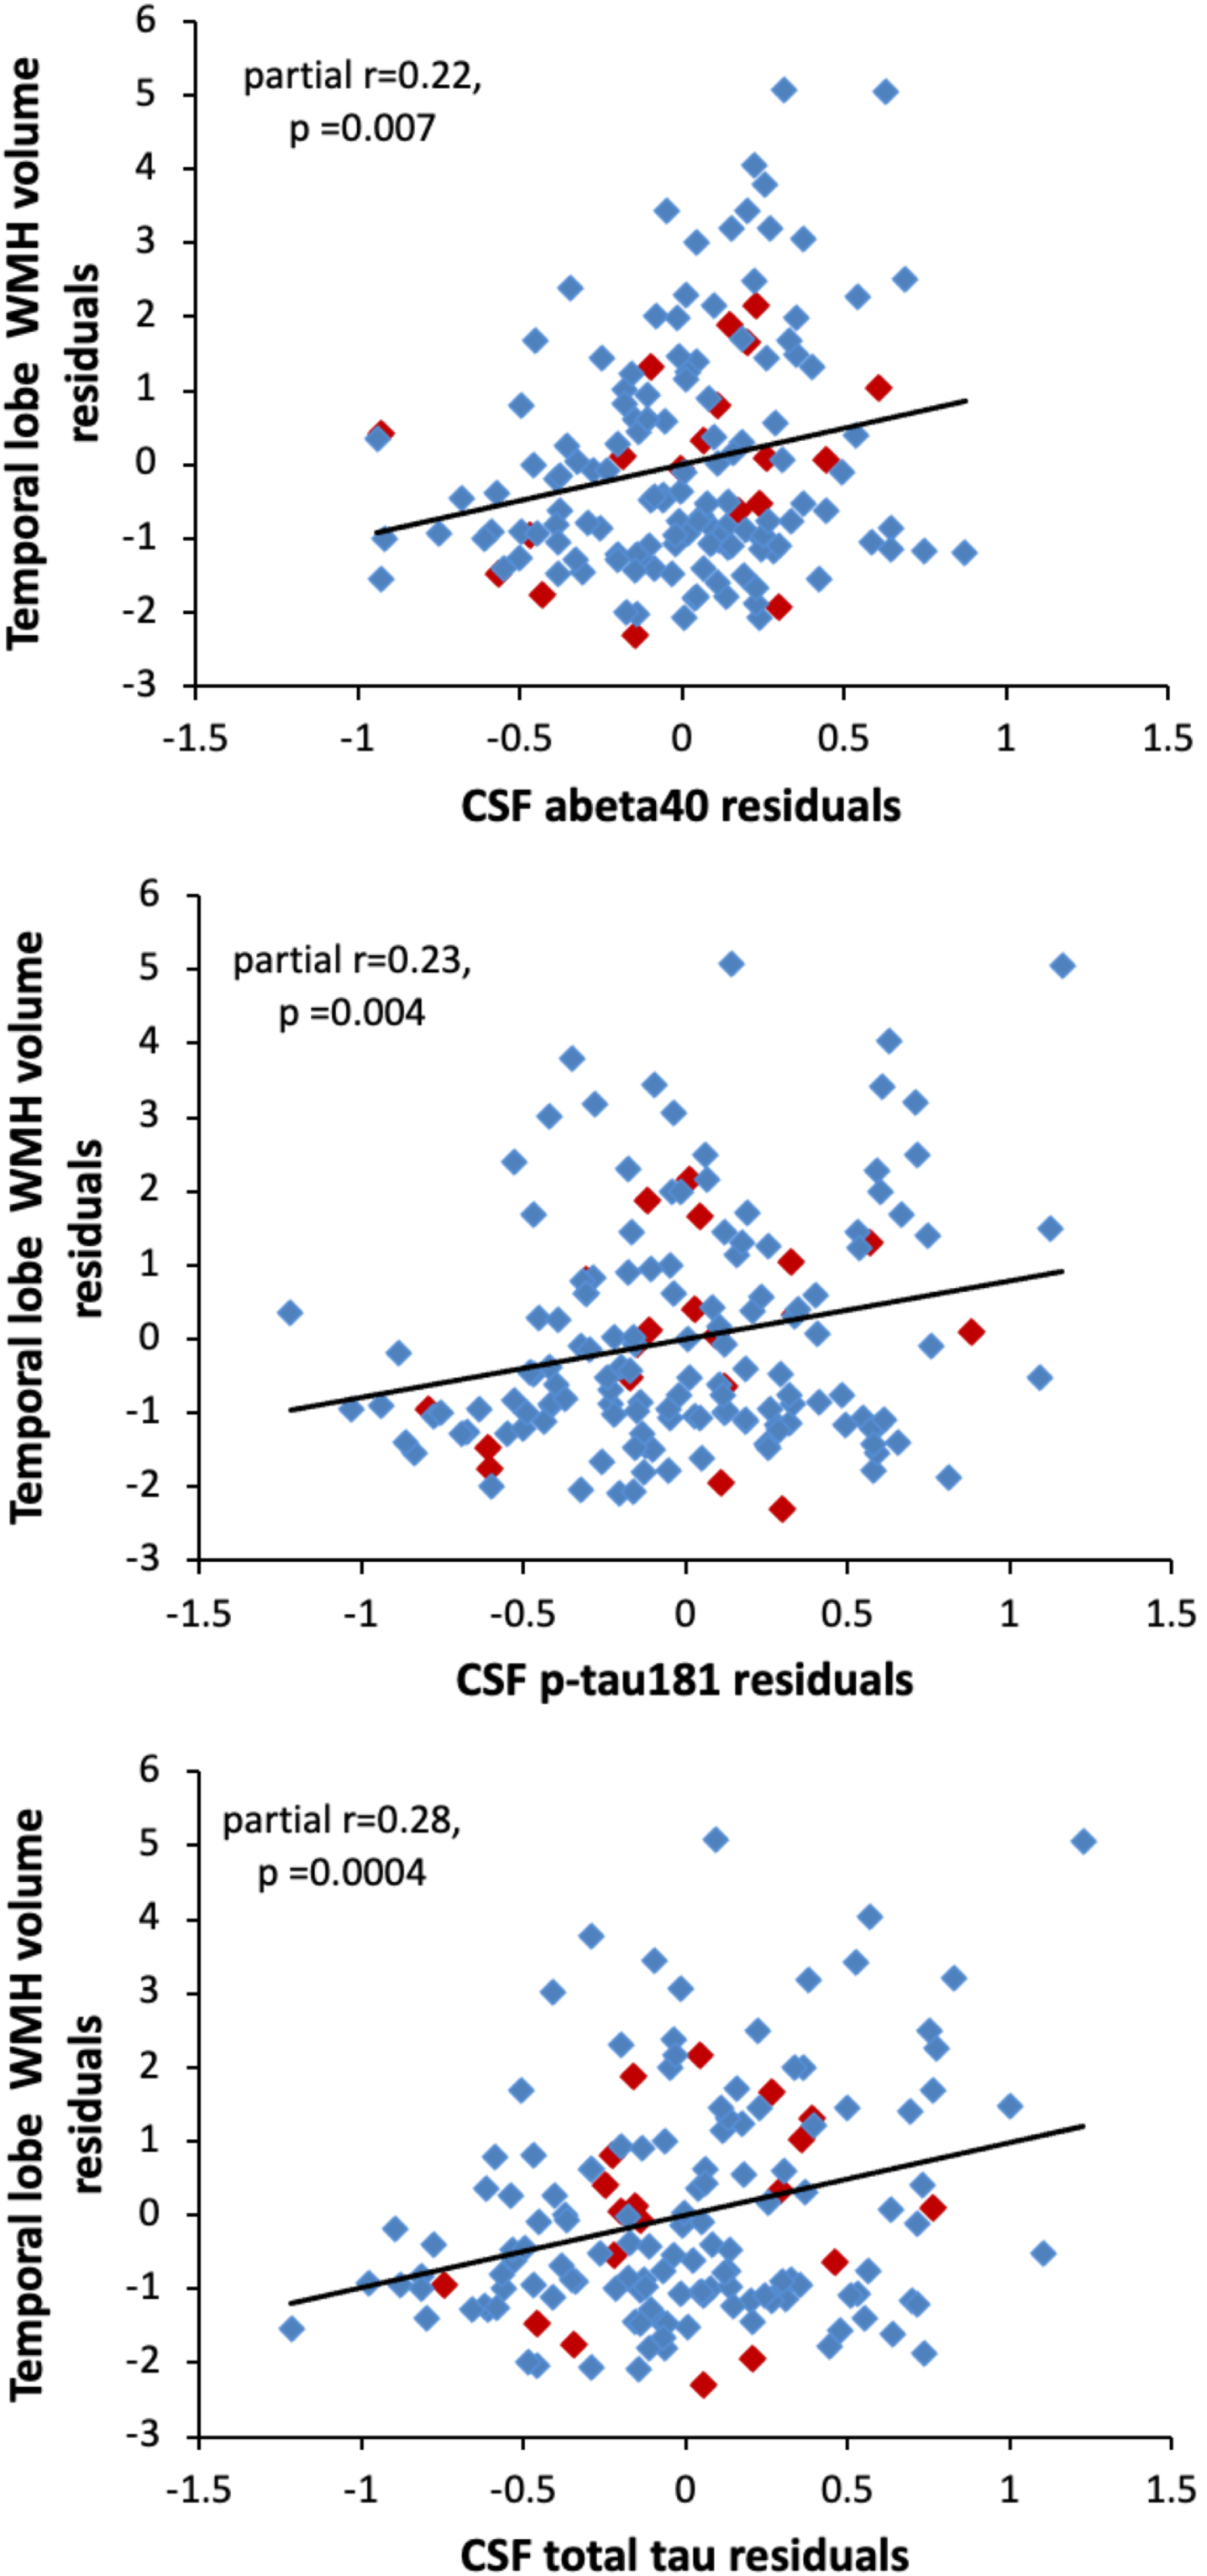 Scatterplots showing the partial correlations between white matter hyperintensity volumes in the temporal lobe (y-axis) and CSF levels of Aβ 40 (top panel), p-tau181 (middle panel), and t-tau (bottom panel). Correlations are adjusted for age, sex, years of education, and diagnostic status. Participants with a diagnosis of MCI are shown red (◊); participants with normal cognition are shown in blue (◊).